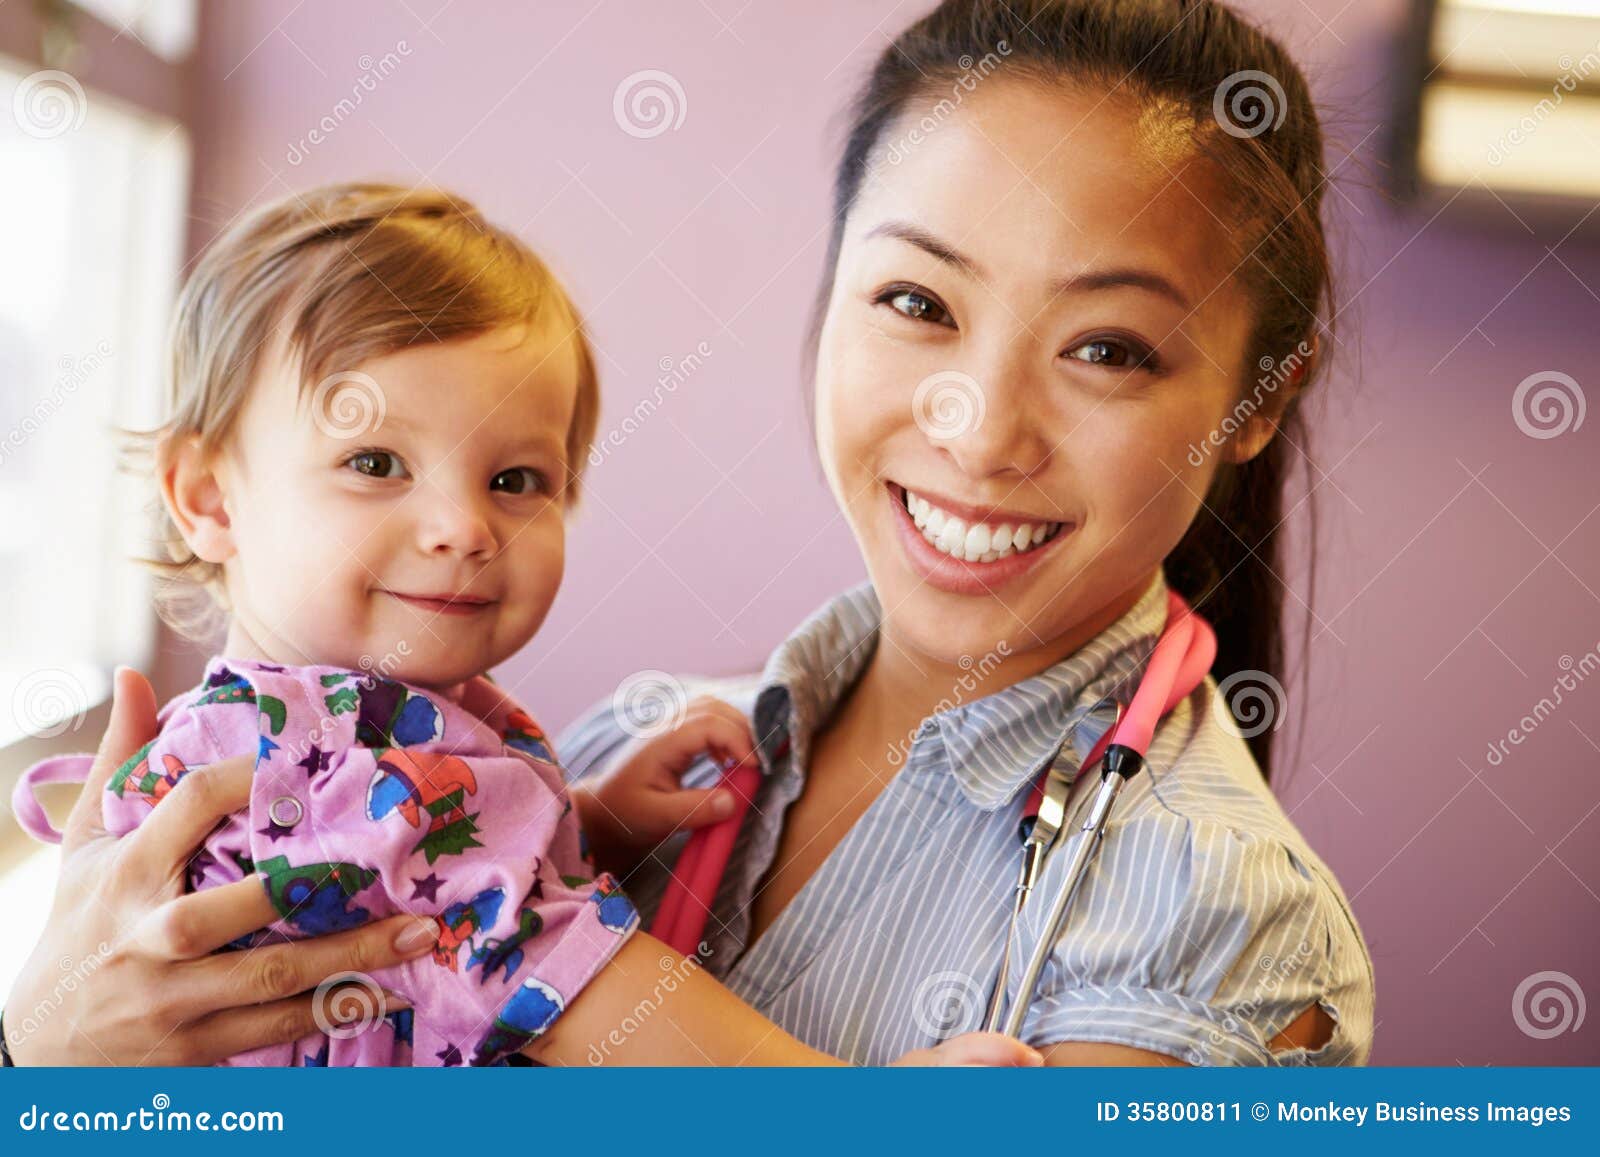 young girl being held by female pediatric doctor